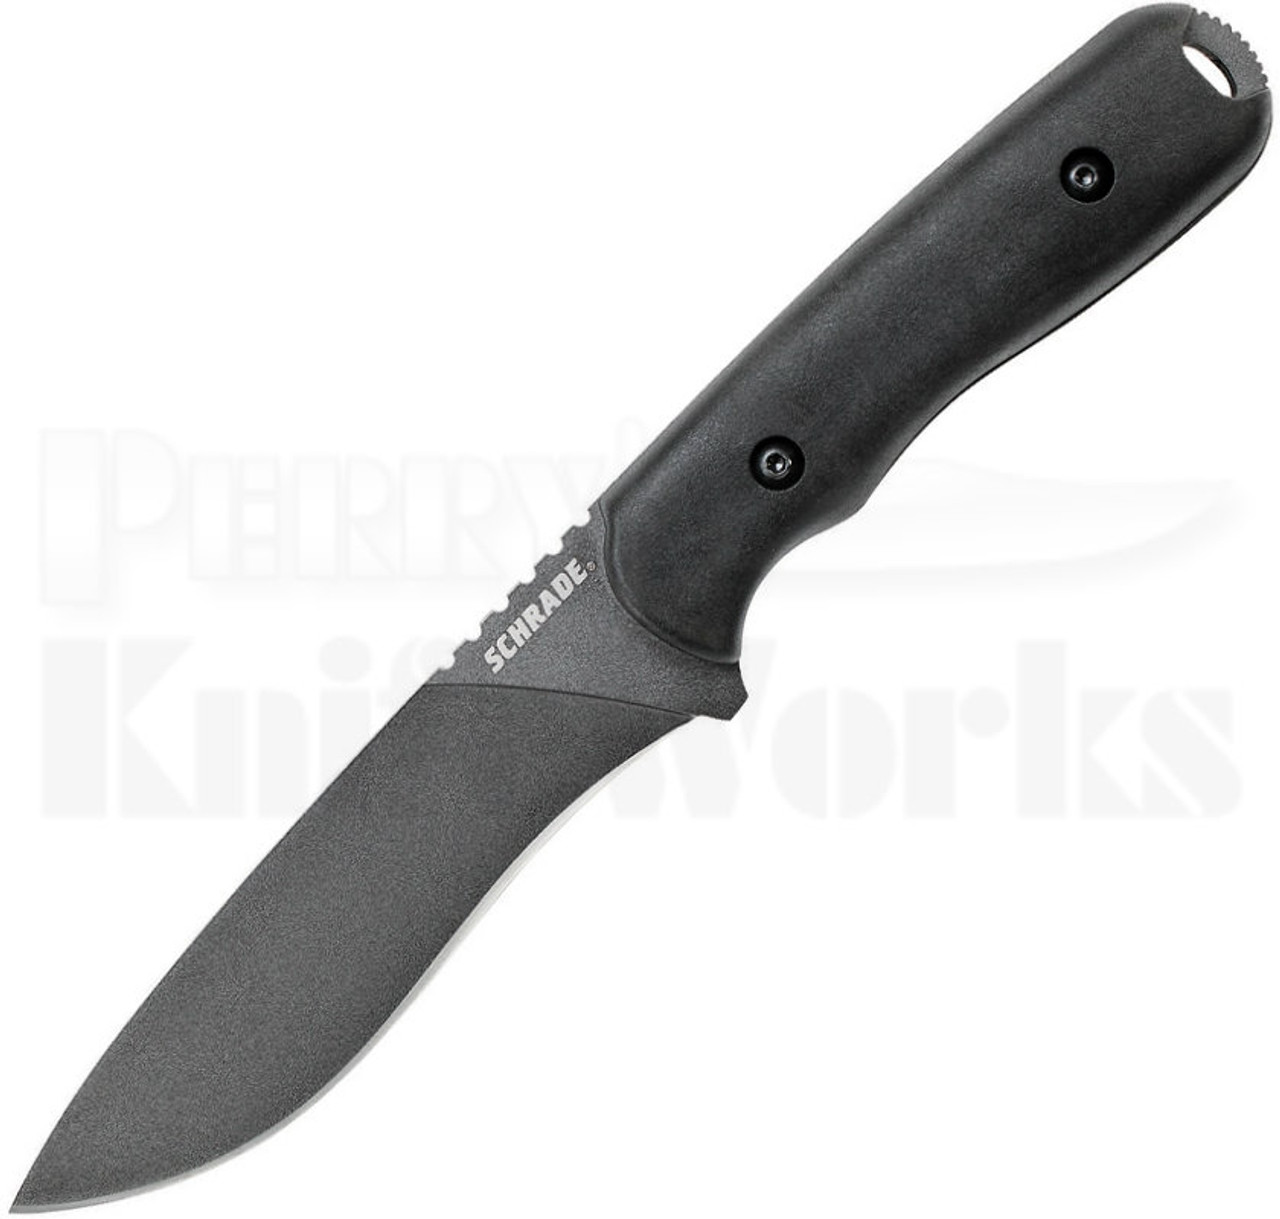 Schrade Frontier Fixed Blade Knife Black SCHF42 l Perry Knife Works